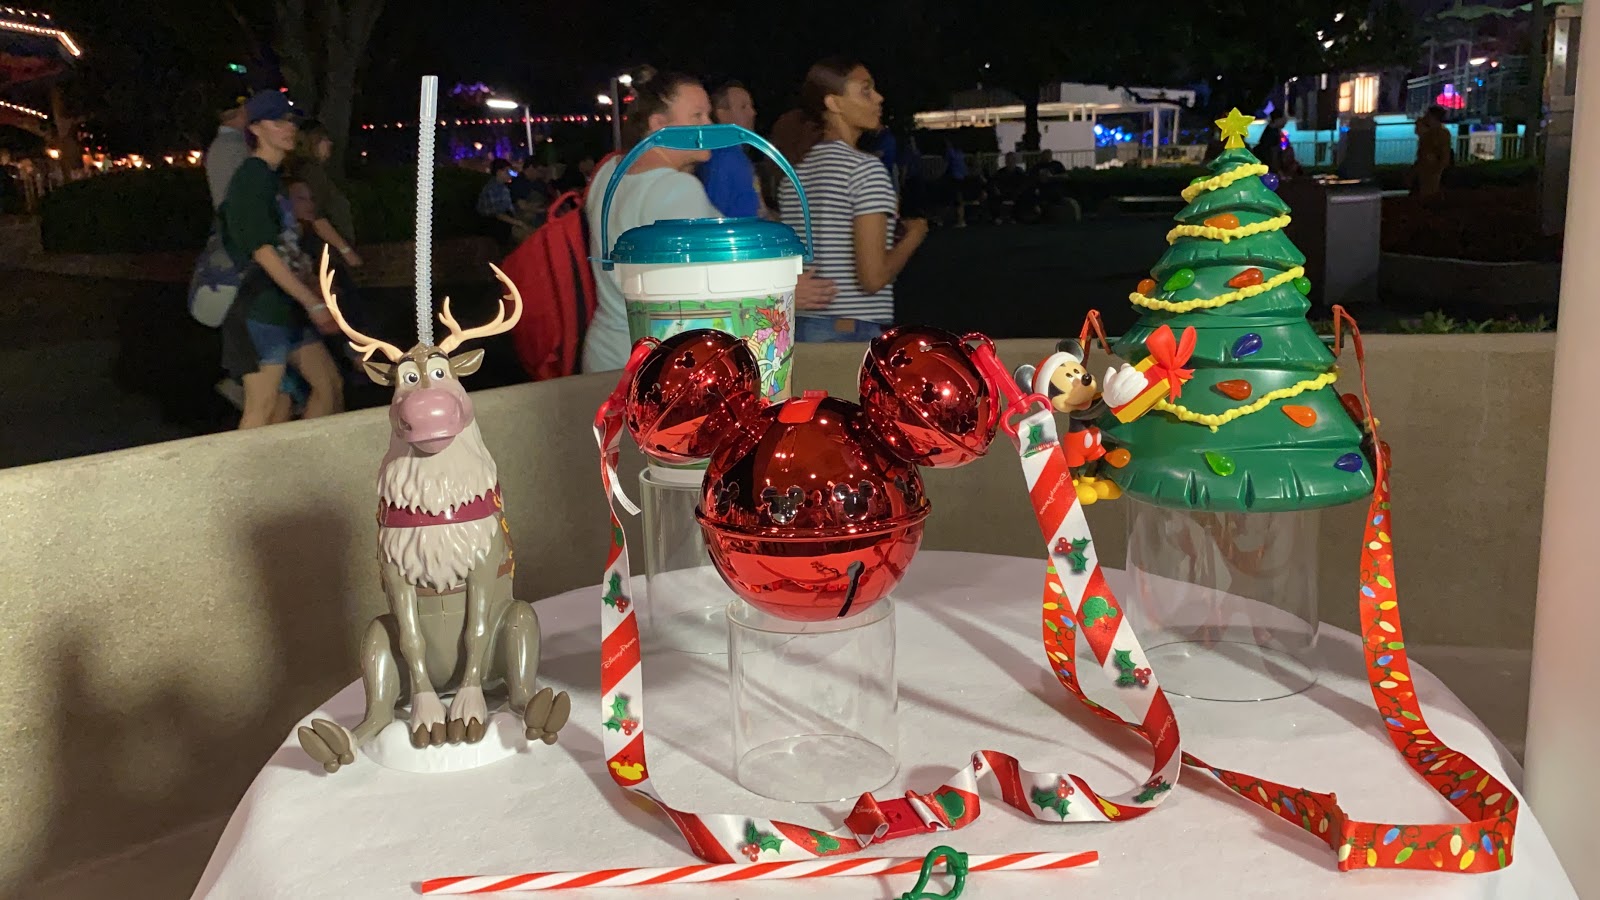 Recapping a 2019 Mickey’s Very Merry Christmas Party at Magic Kingdom - 0